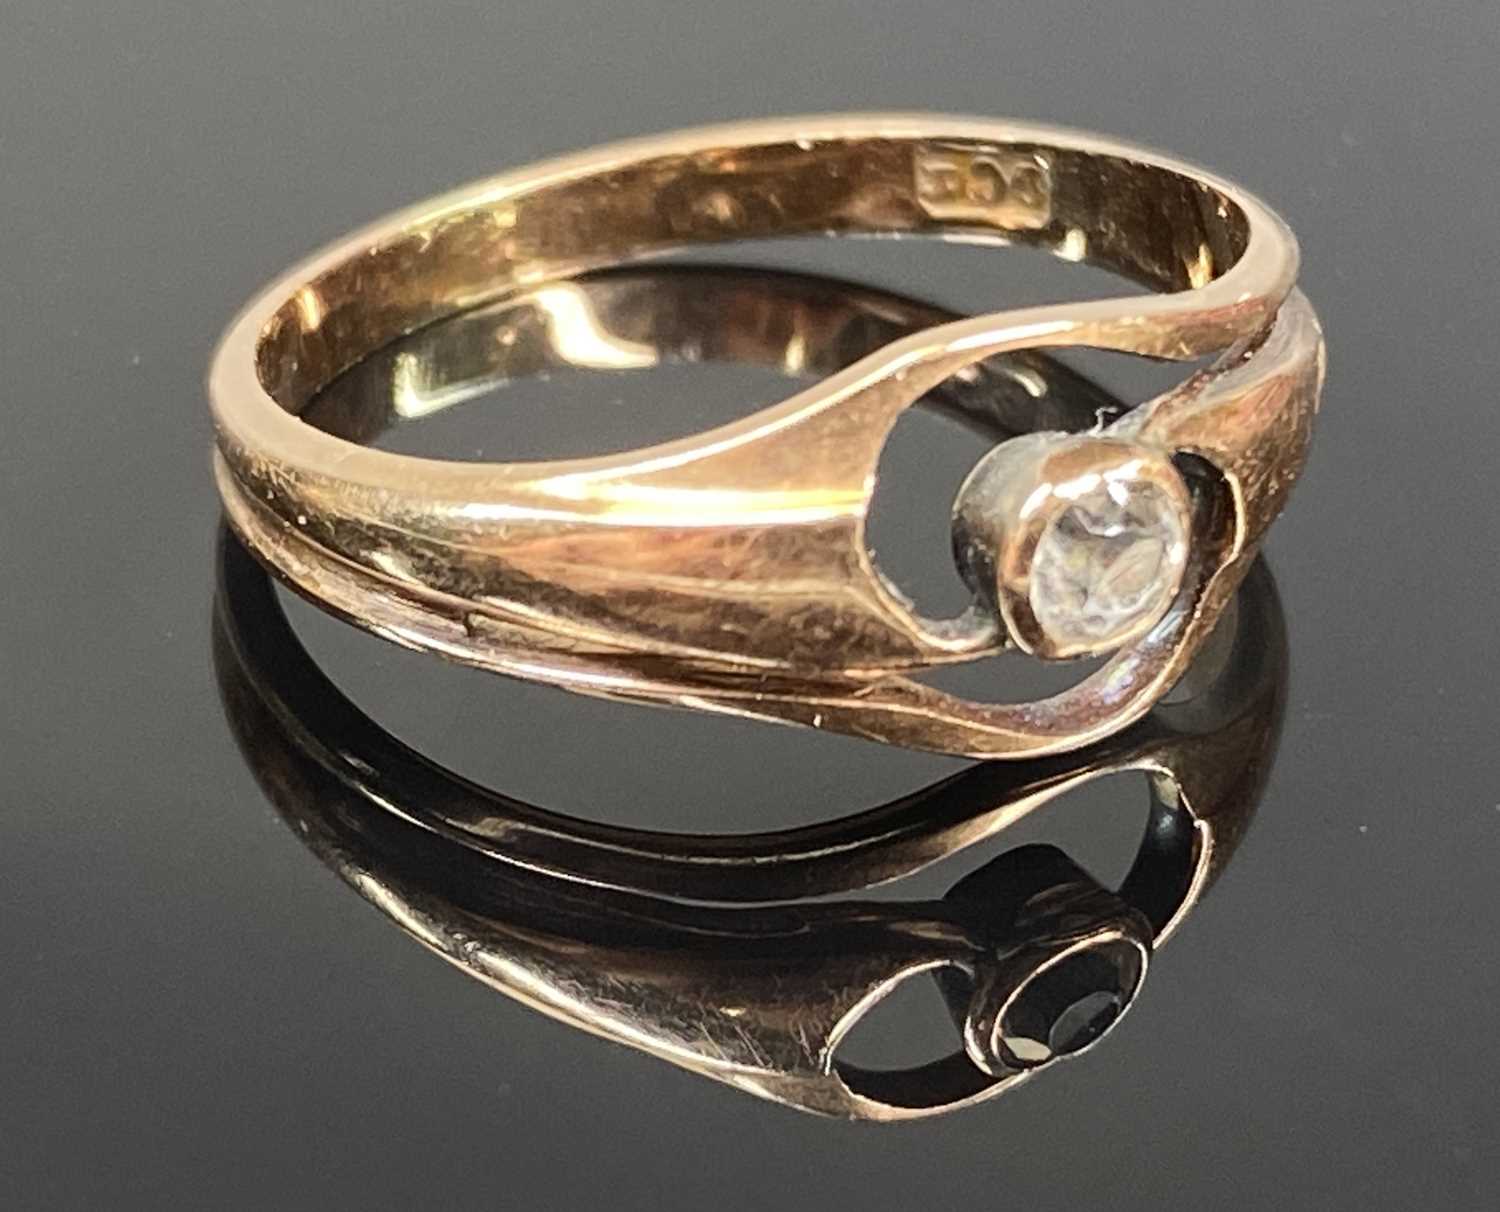 9CT GOLD RING set with small solitaire diamond, size M, 1.5gms Provenance: private collection - Image 2 of 3